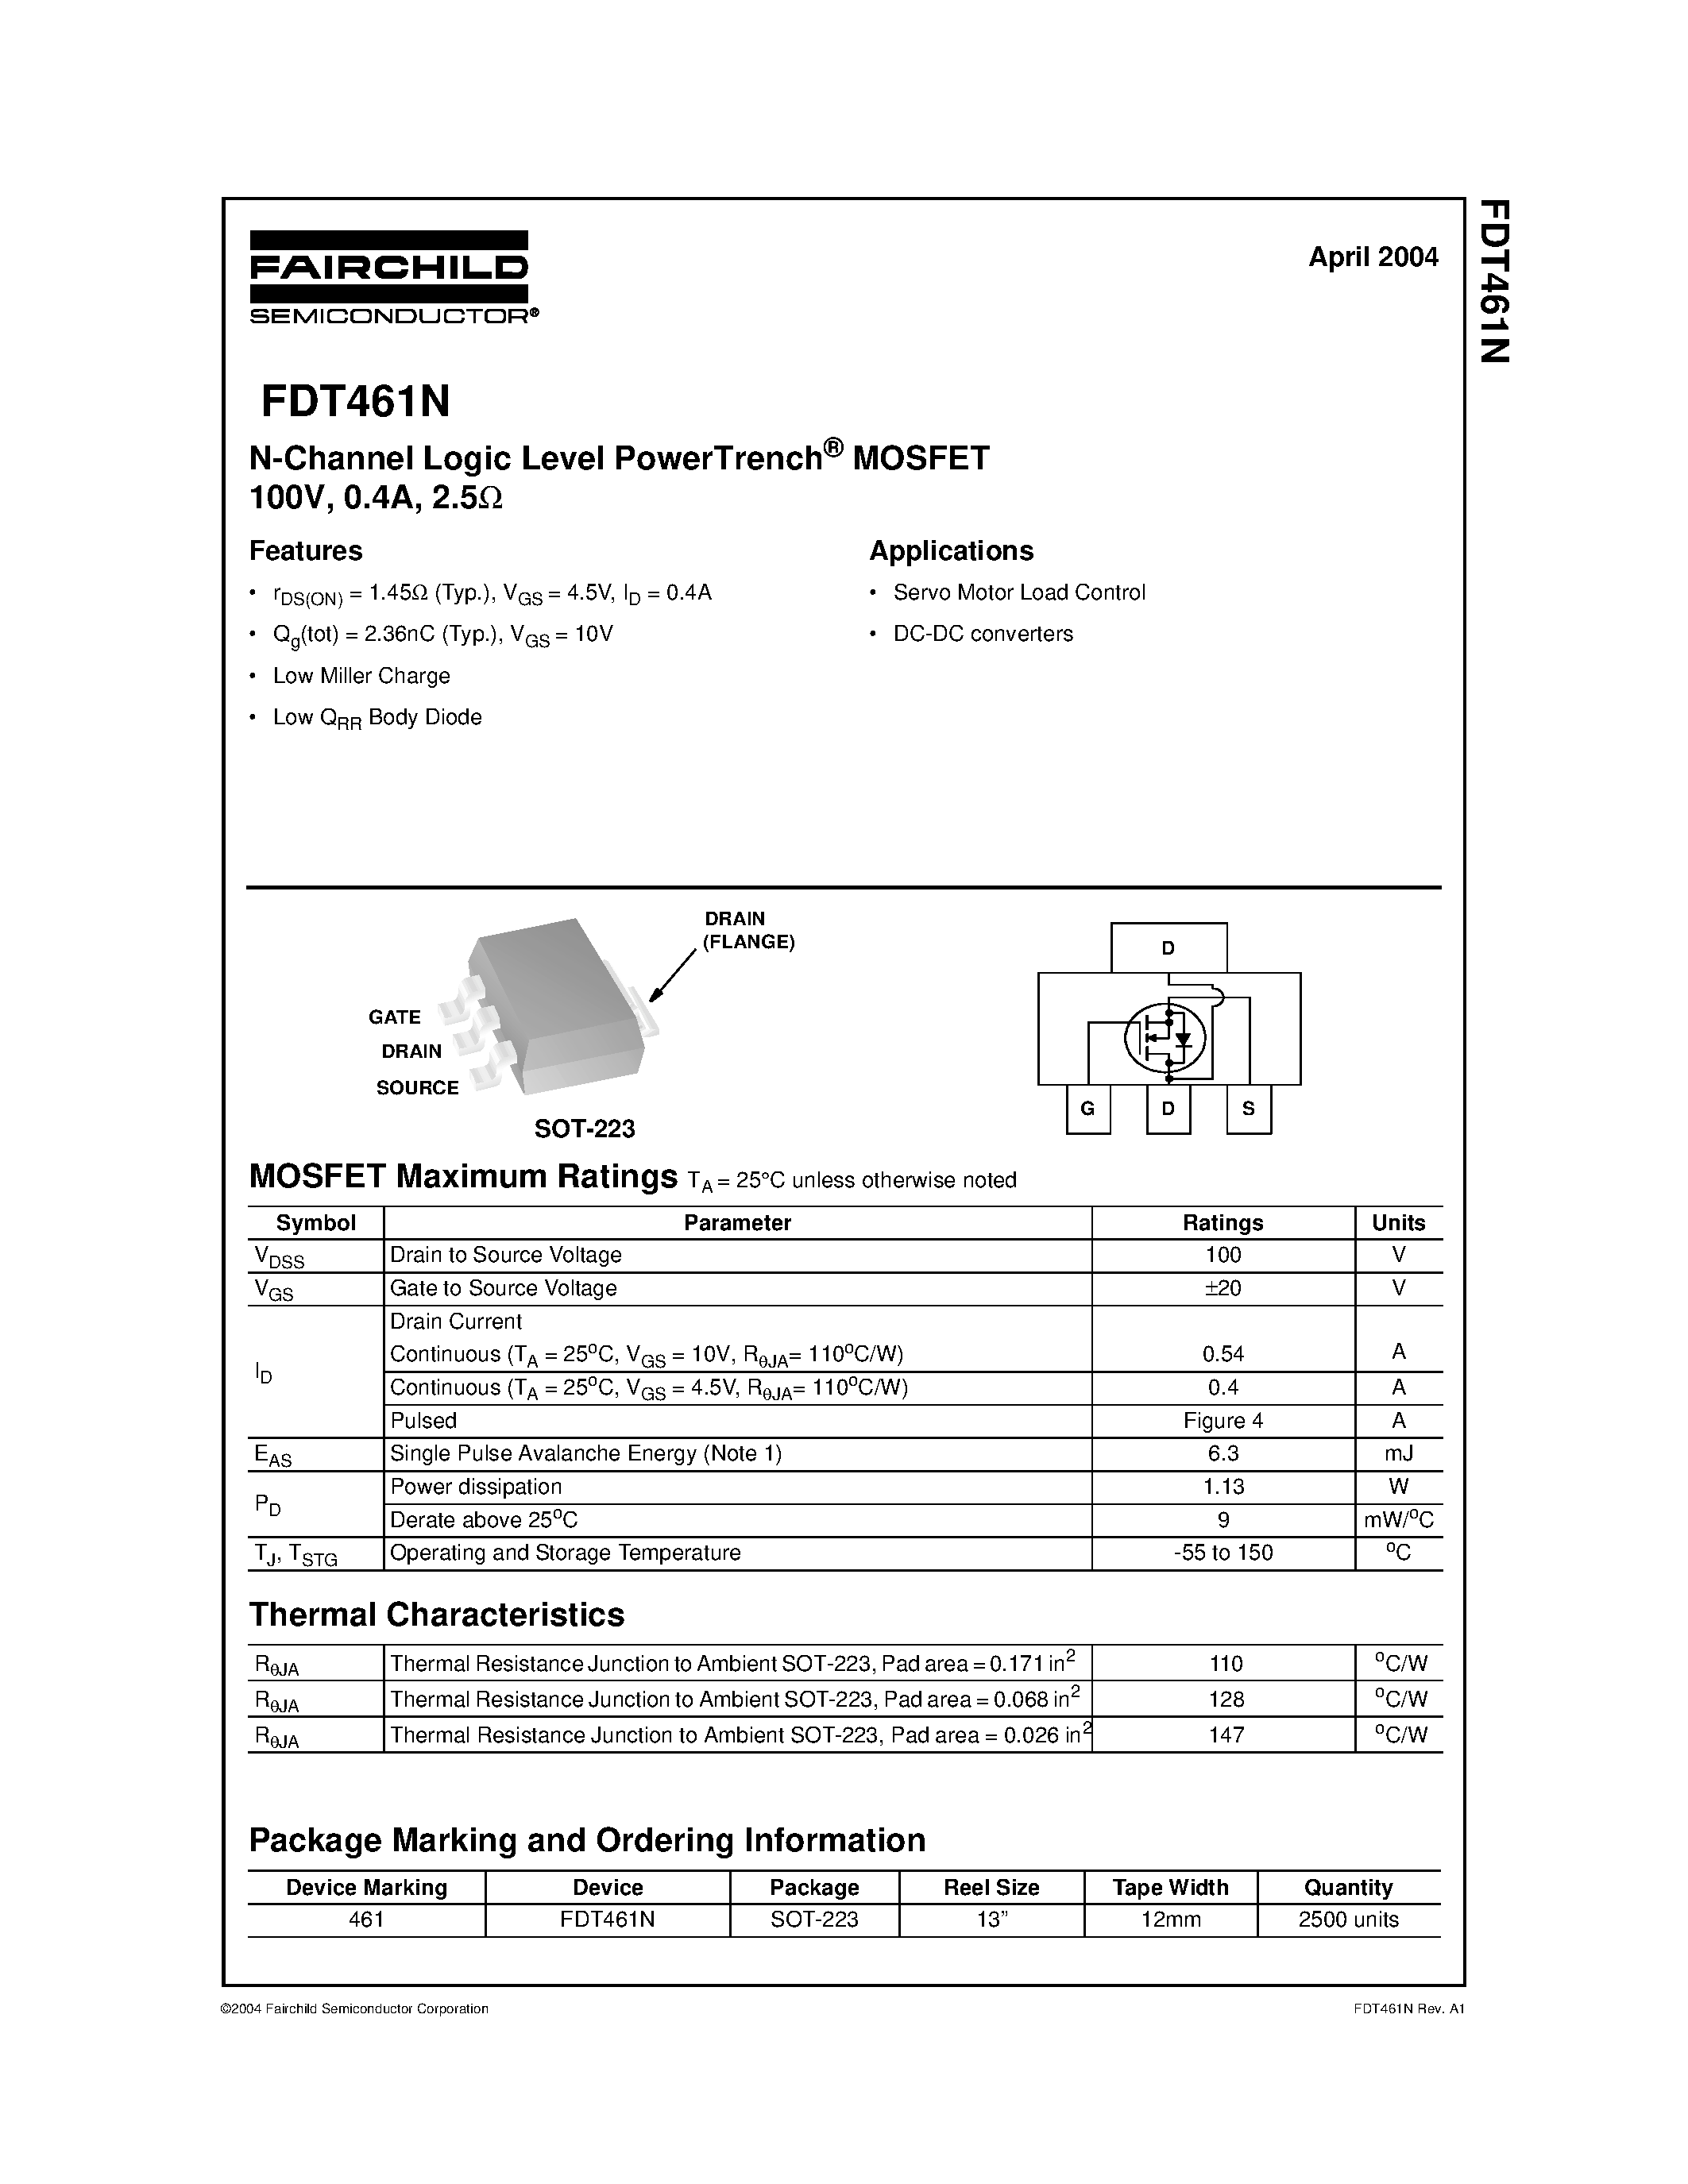 Даташит FDT461N - N-Channel Logic Level PowerTrench MOSFET страница 1